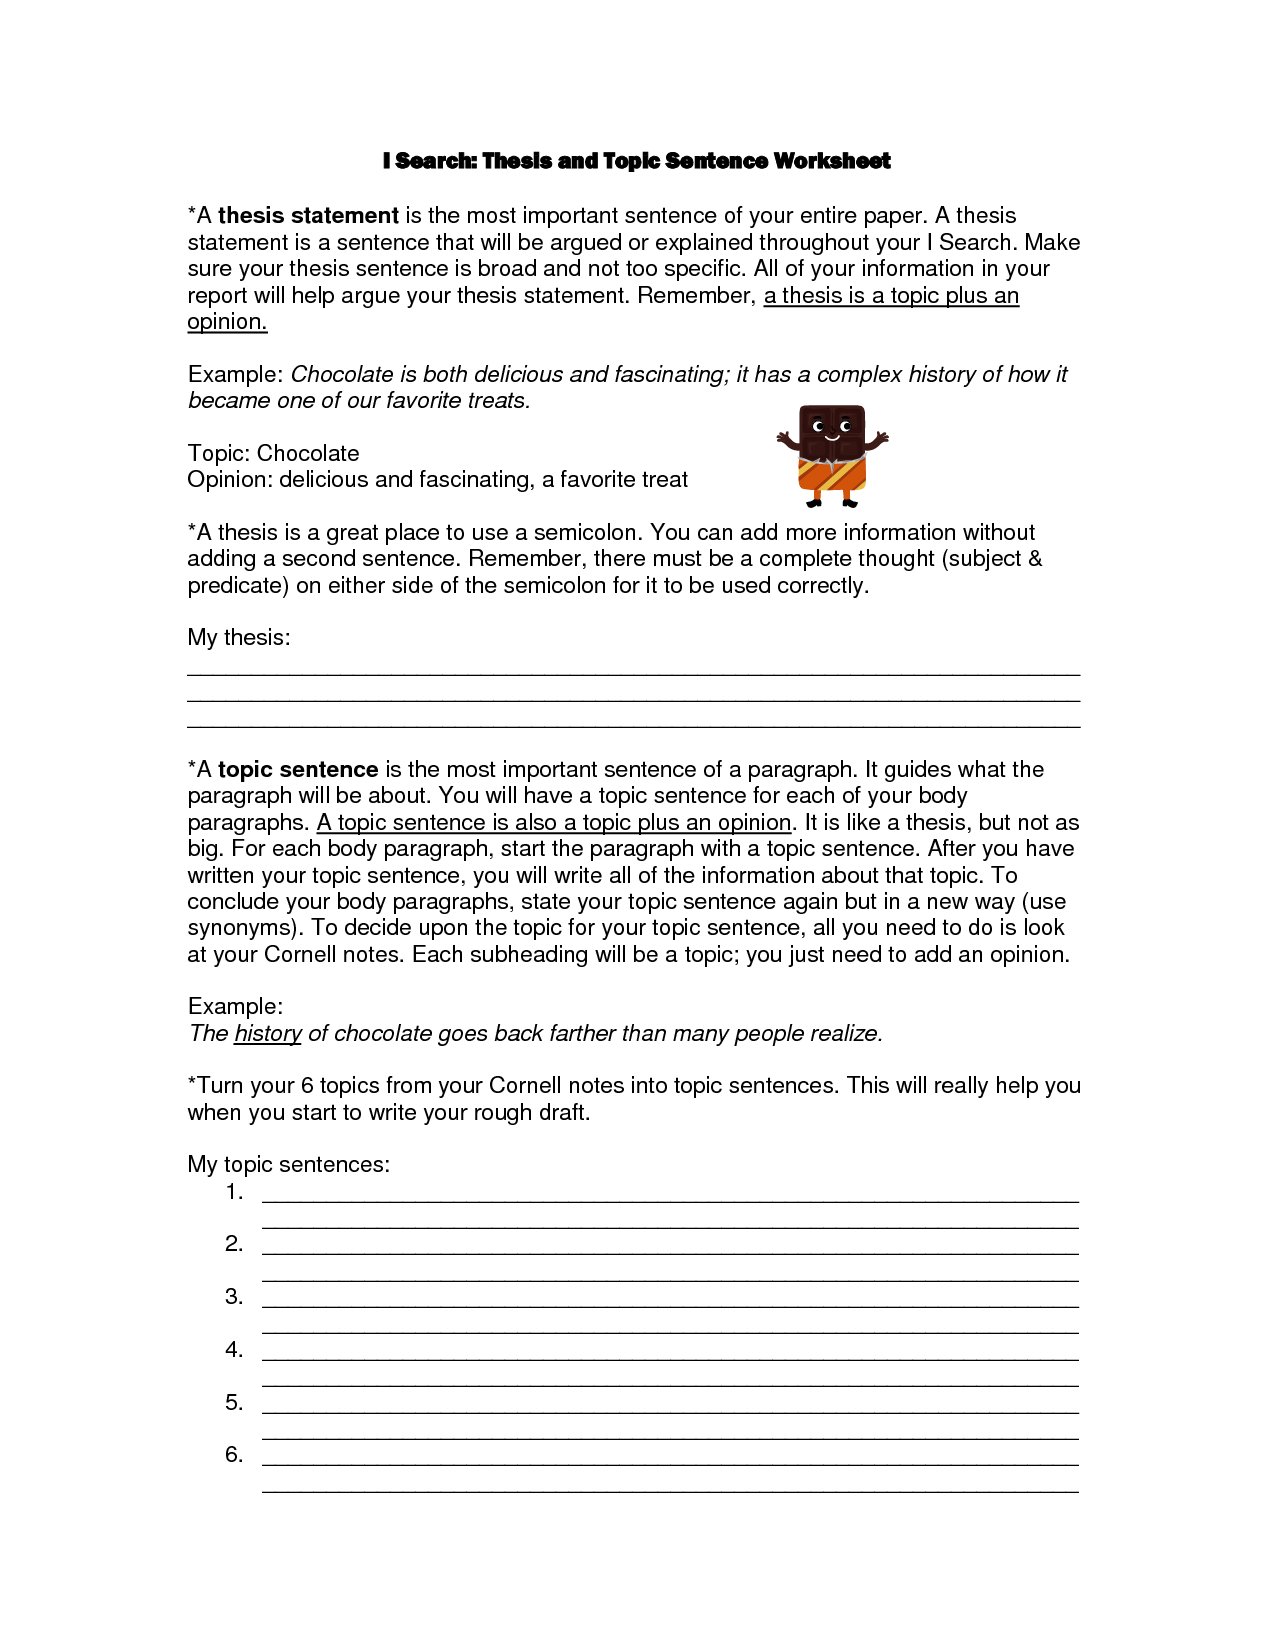 topic-sentences-worksheet-1-topic-sentences-worksheet-1-what-is-a-topic-sentence-exercise